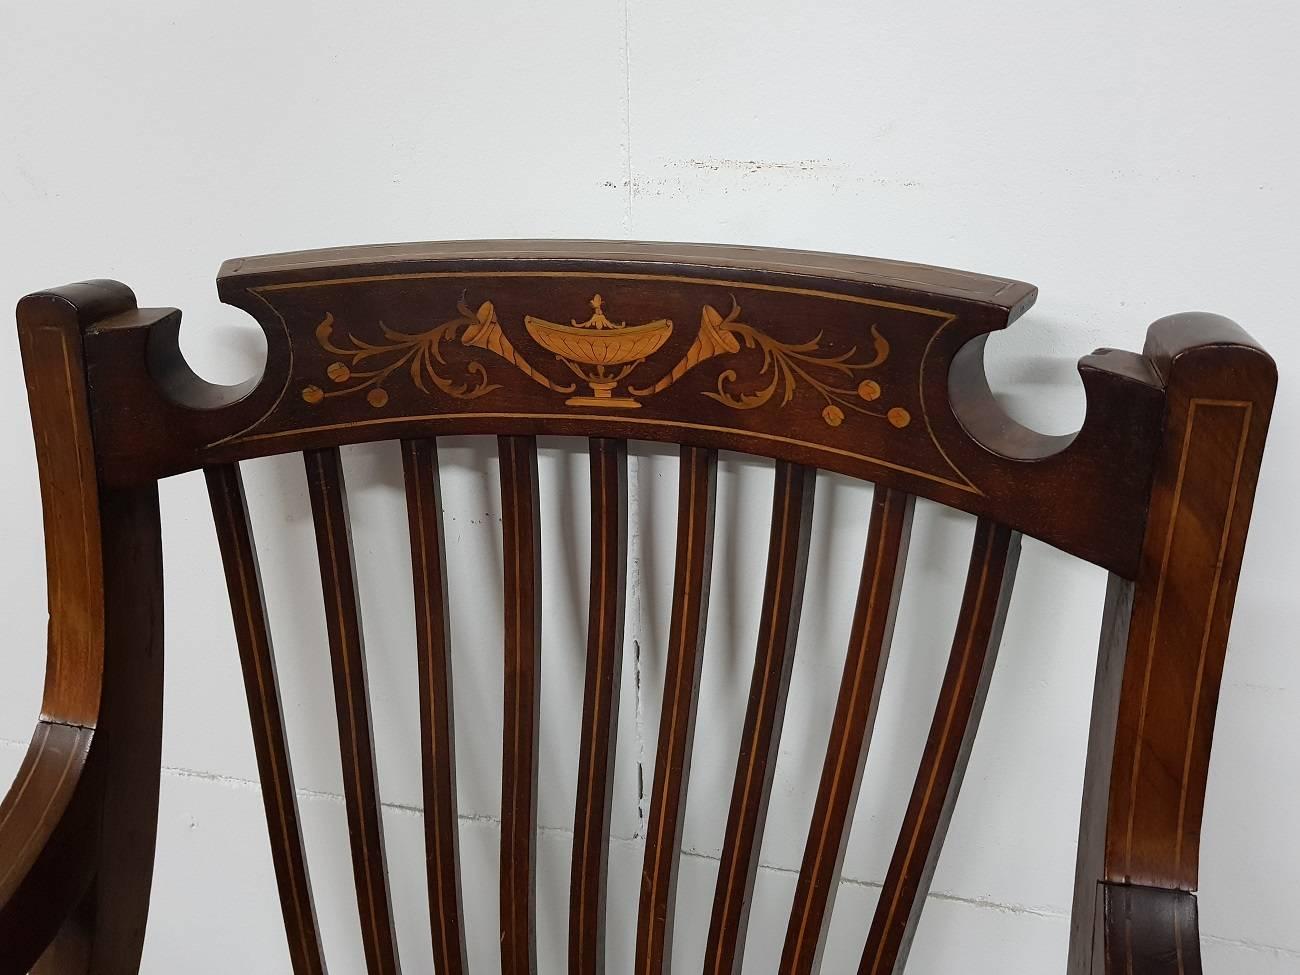 English mahogany Regency style armchair inlaid with various types of wood and made in the second half of the 19th century.

The measurements are.
Depth 60 cm/ 23.6 inch.
Width 59 cm/ 23.2 inch.
Height 93 cm/ 36.6 inch.
Seat height 46 cm/ 18.1